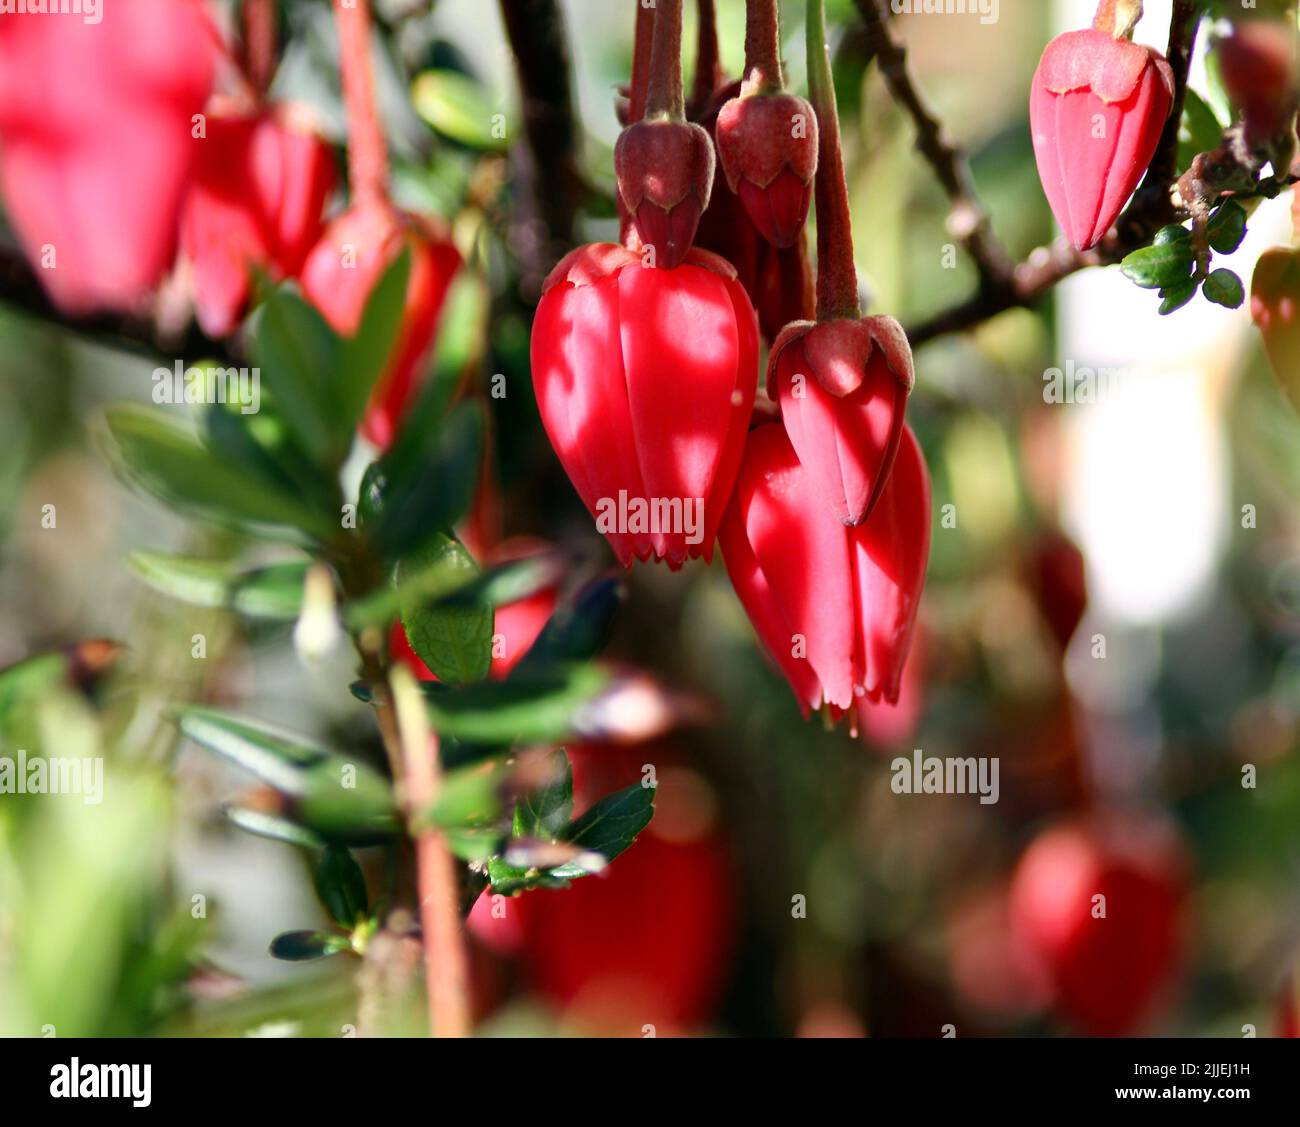 A view of the Chilean lantern tree Stock Photo